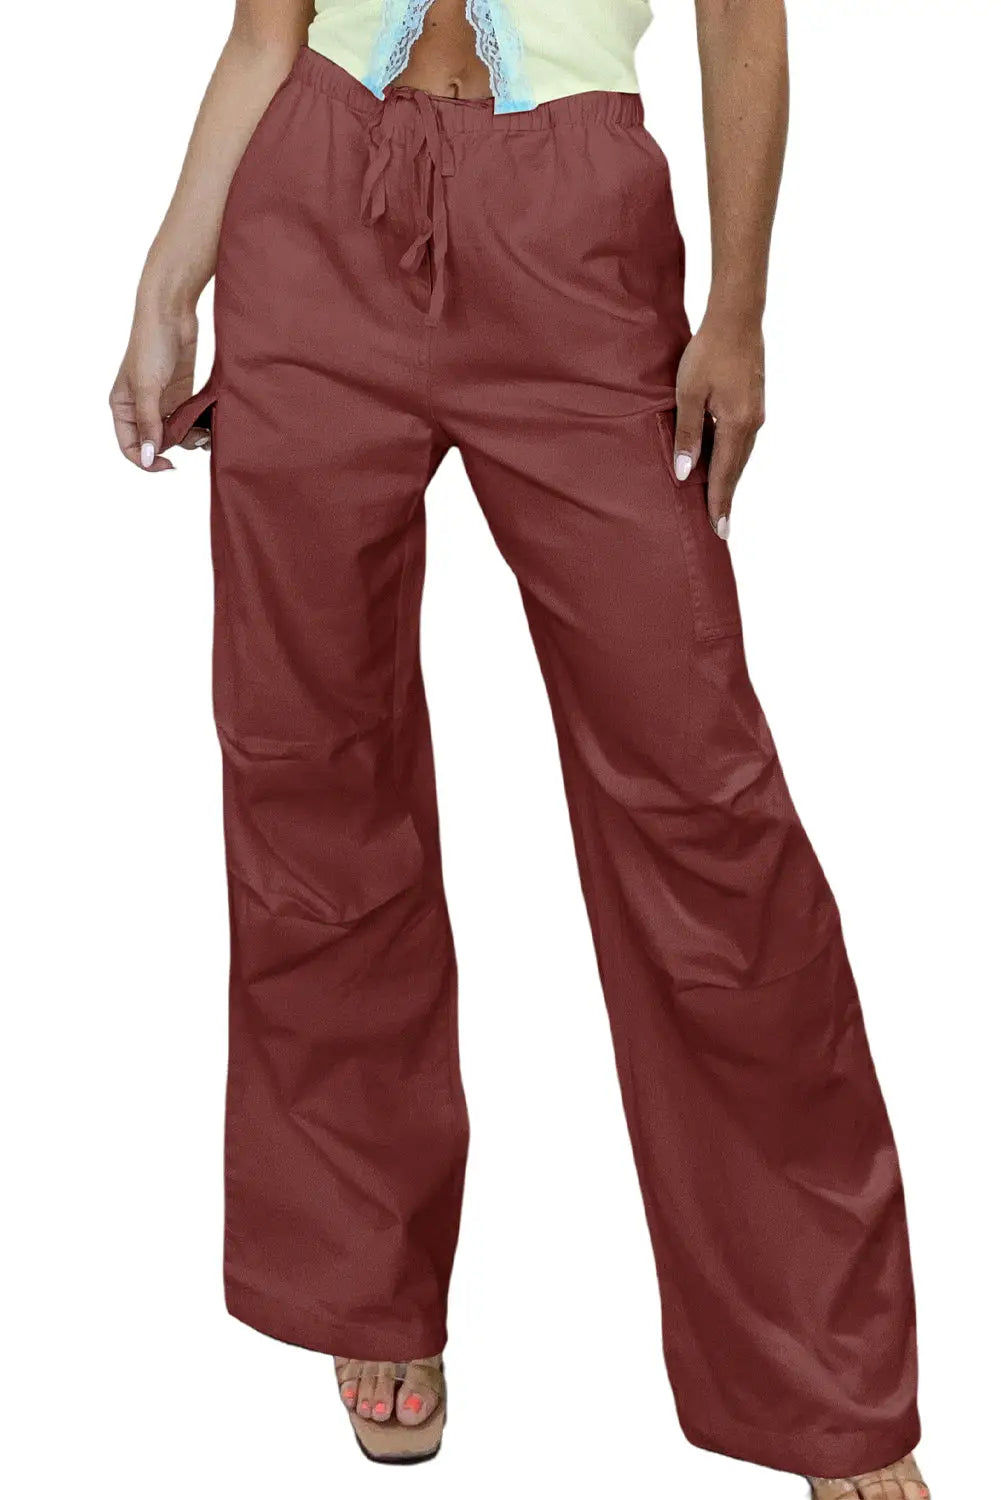 Mineral red solid color drawstring waist wide leg cargo